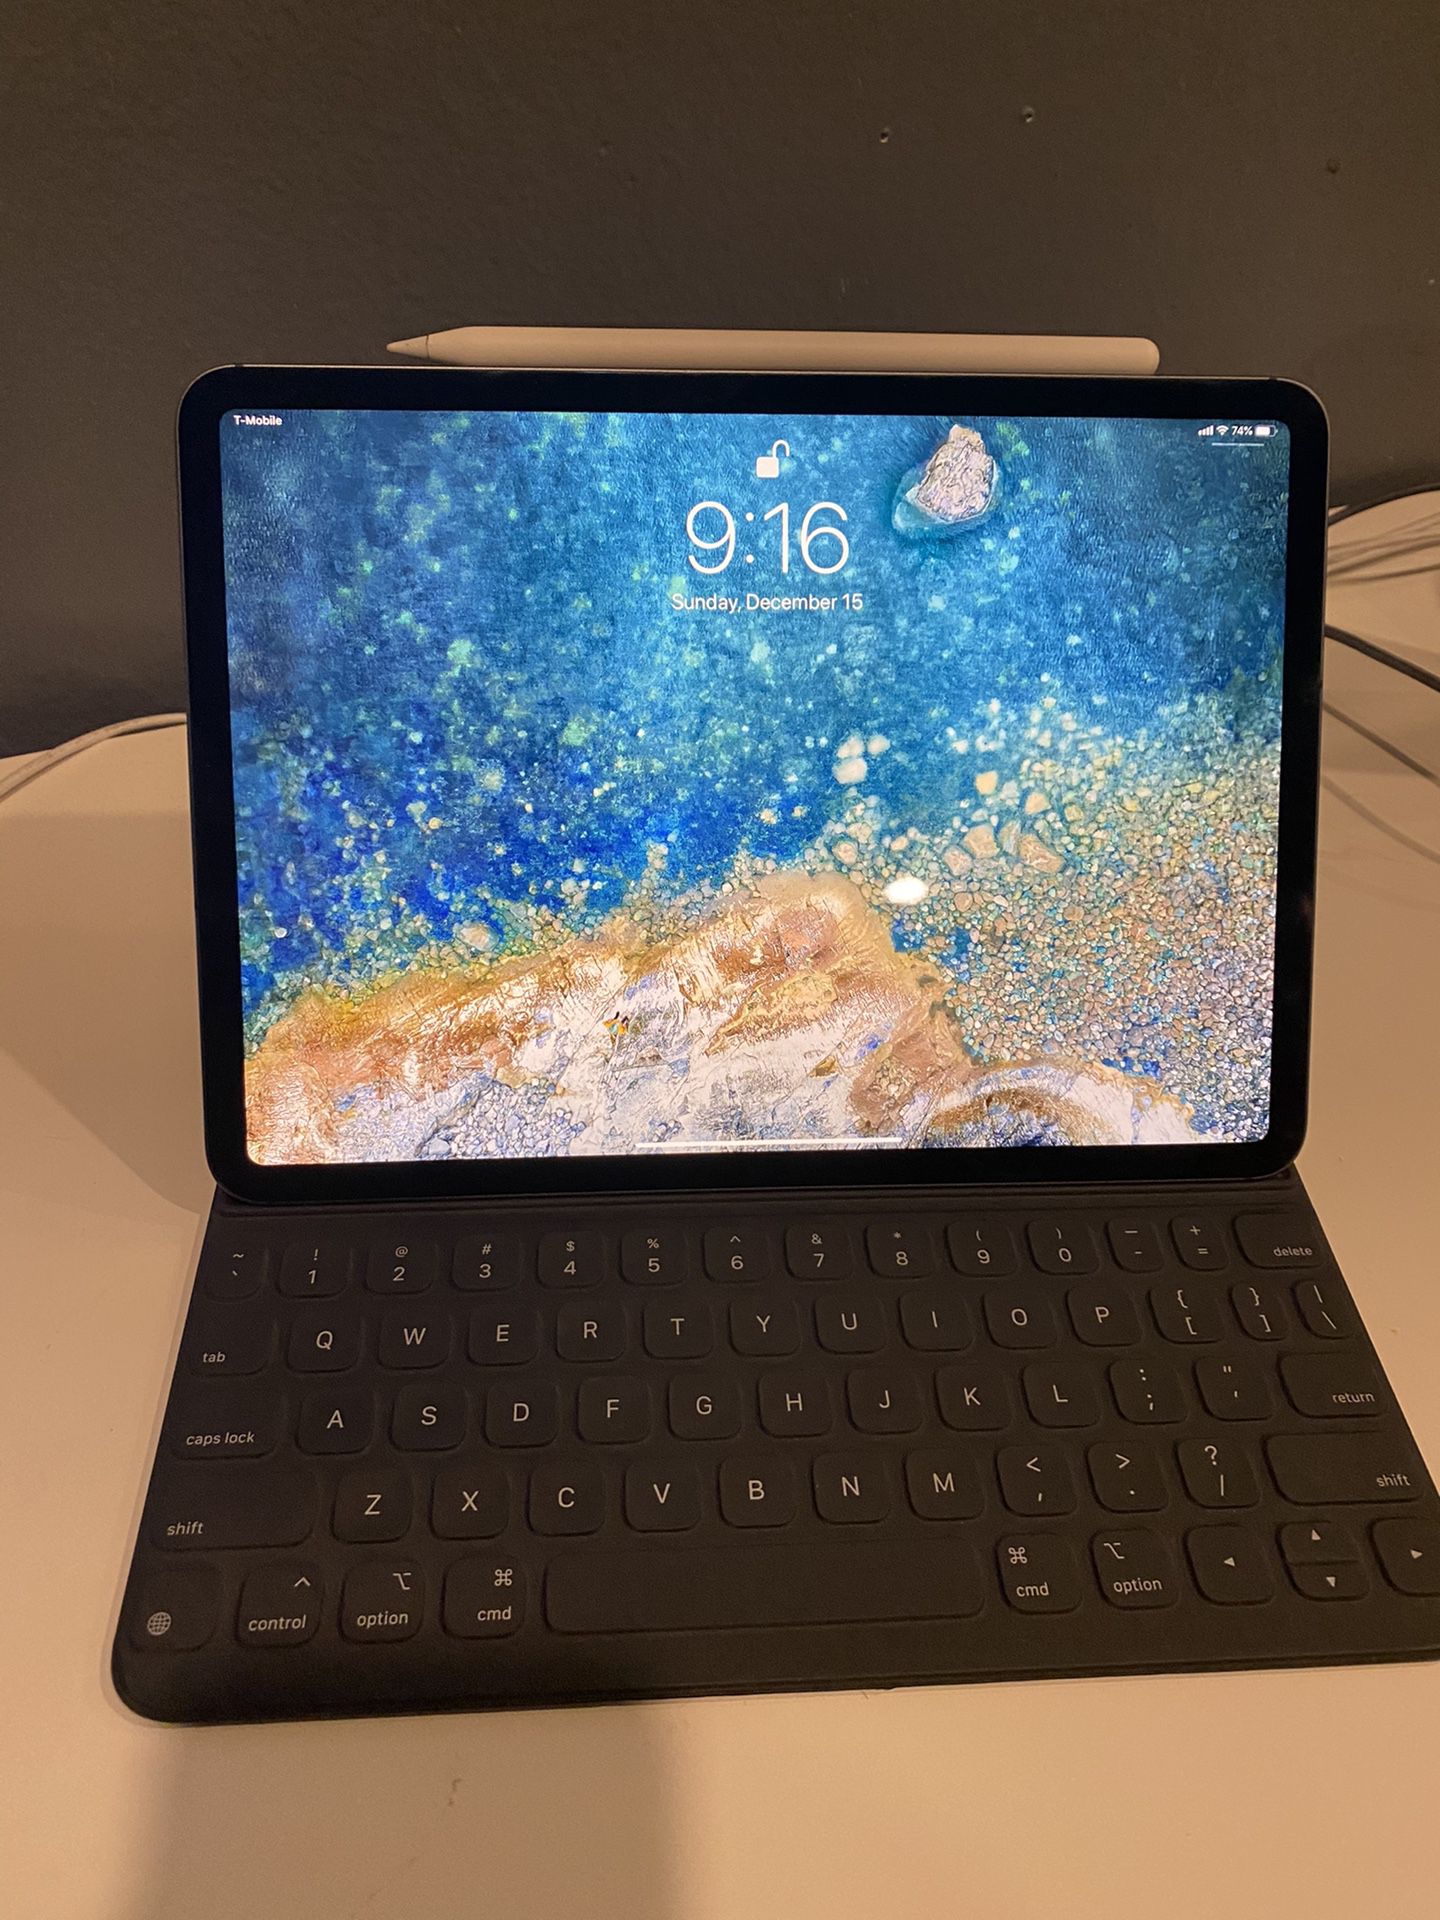 iPad Pro 11" 256gb with LTE. Includes Apple Pencil and Apple Smart Keyboard